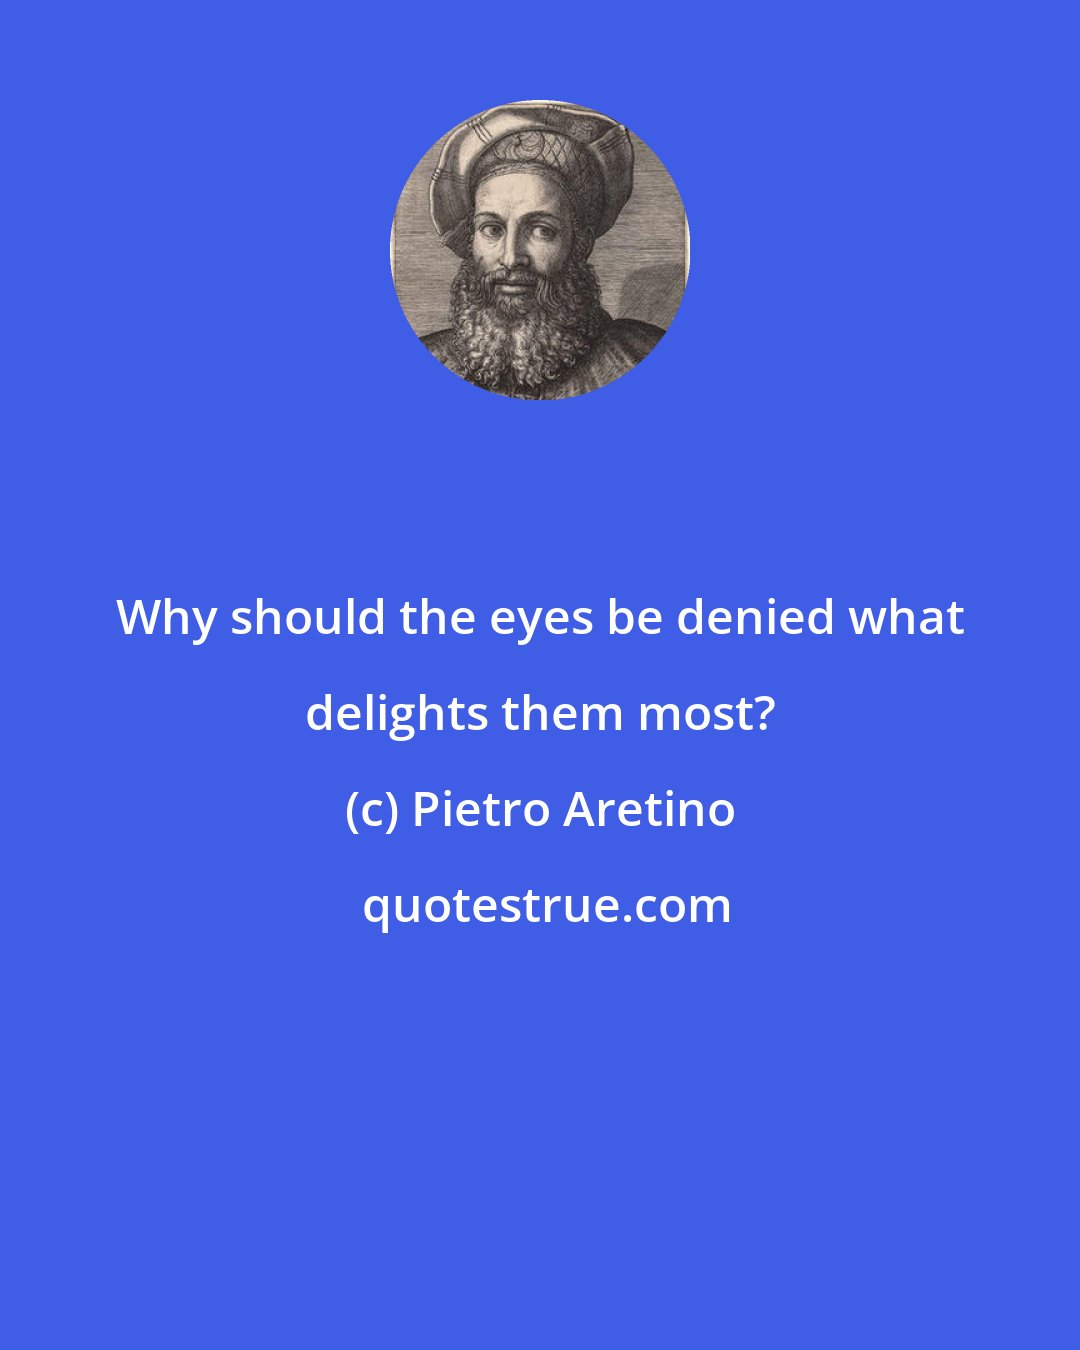 Pietro Aretino: Why should the eyes be denied what delights them most?